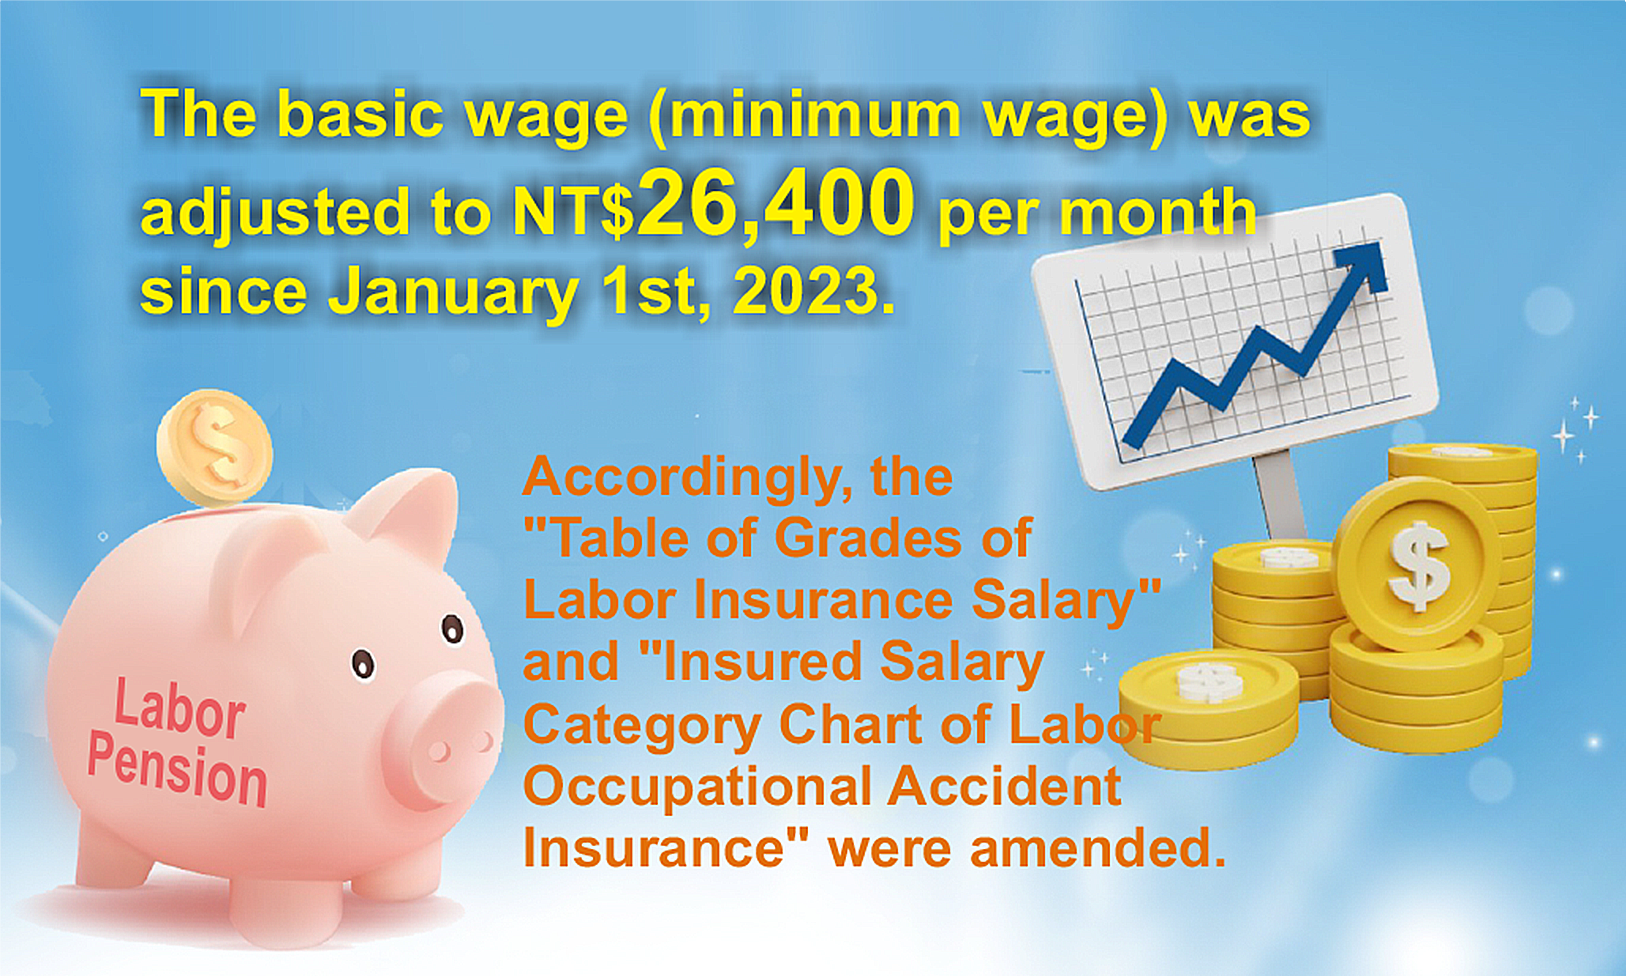 In Line With the Basic Wage (Minimum Wage) Adjustment and the Revision of the "Table of Grades of Insurance Salary" for Labor Insurance Salary and Labor Occupational Accident Insurance Salary in 2023, the Bureau of Labor Insurance (BLI) Has Taken the Initiative to Adjust Insurance Salary of the Labor Insurance, Labor Occupational Accident Insurance, and Labor Pension